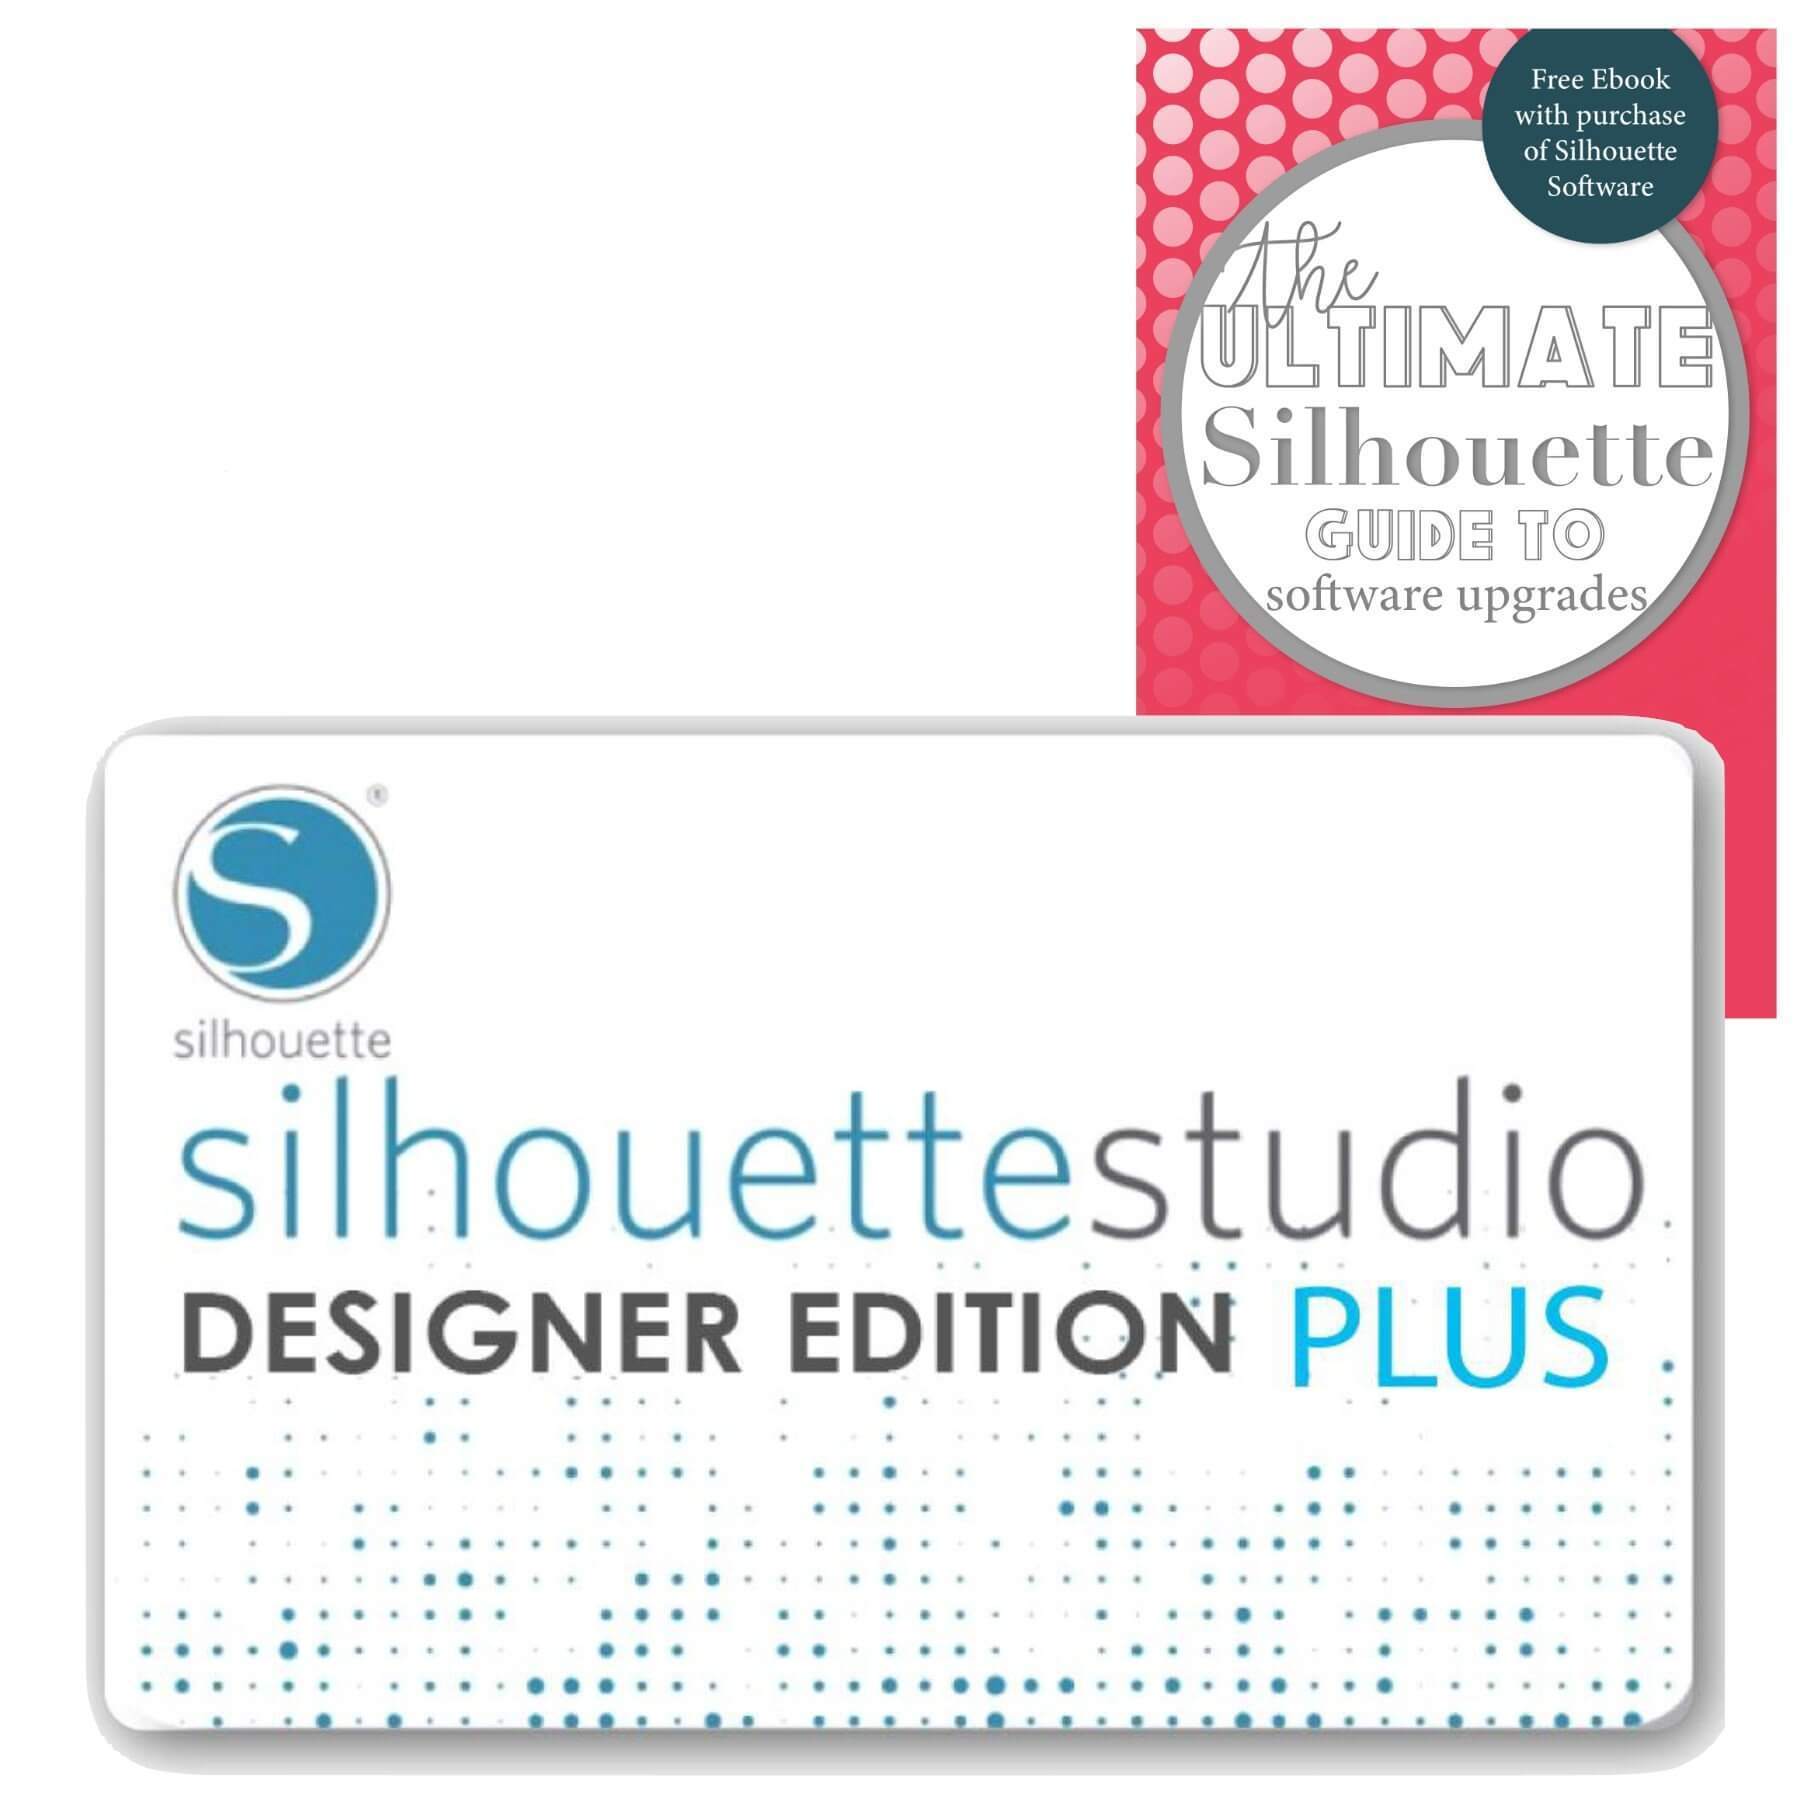 Silhouette Black Friday deals: Up to 25% off Silhouette Portrait 3 and  Cameo 4